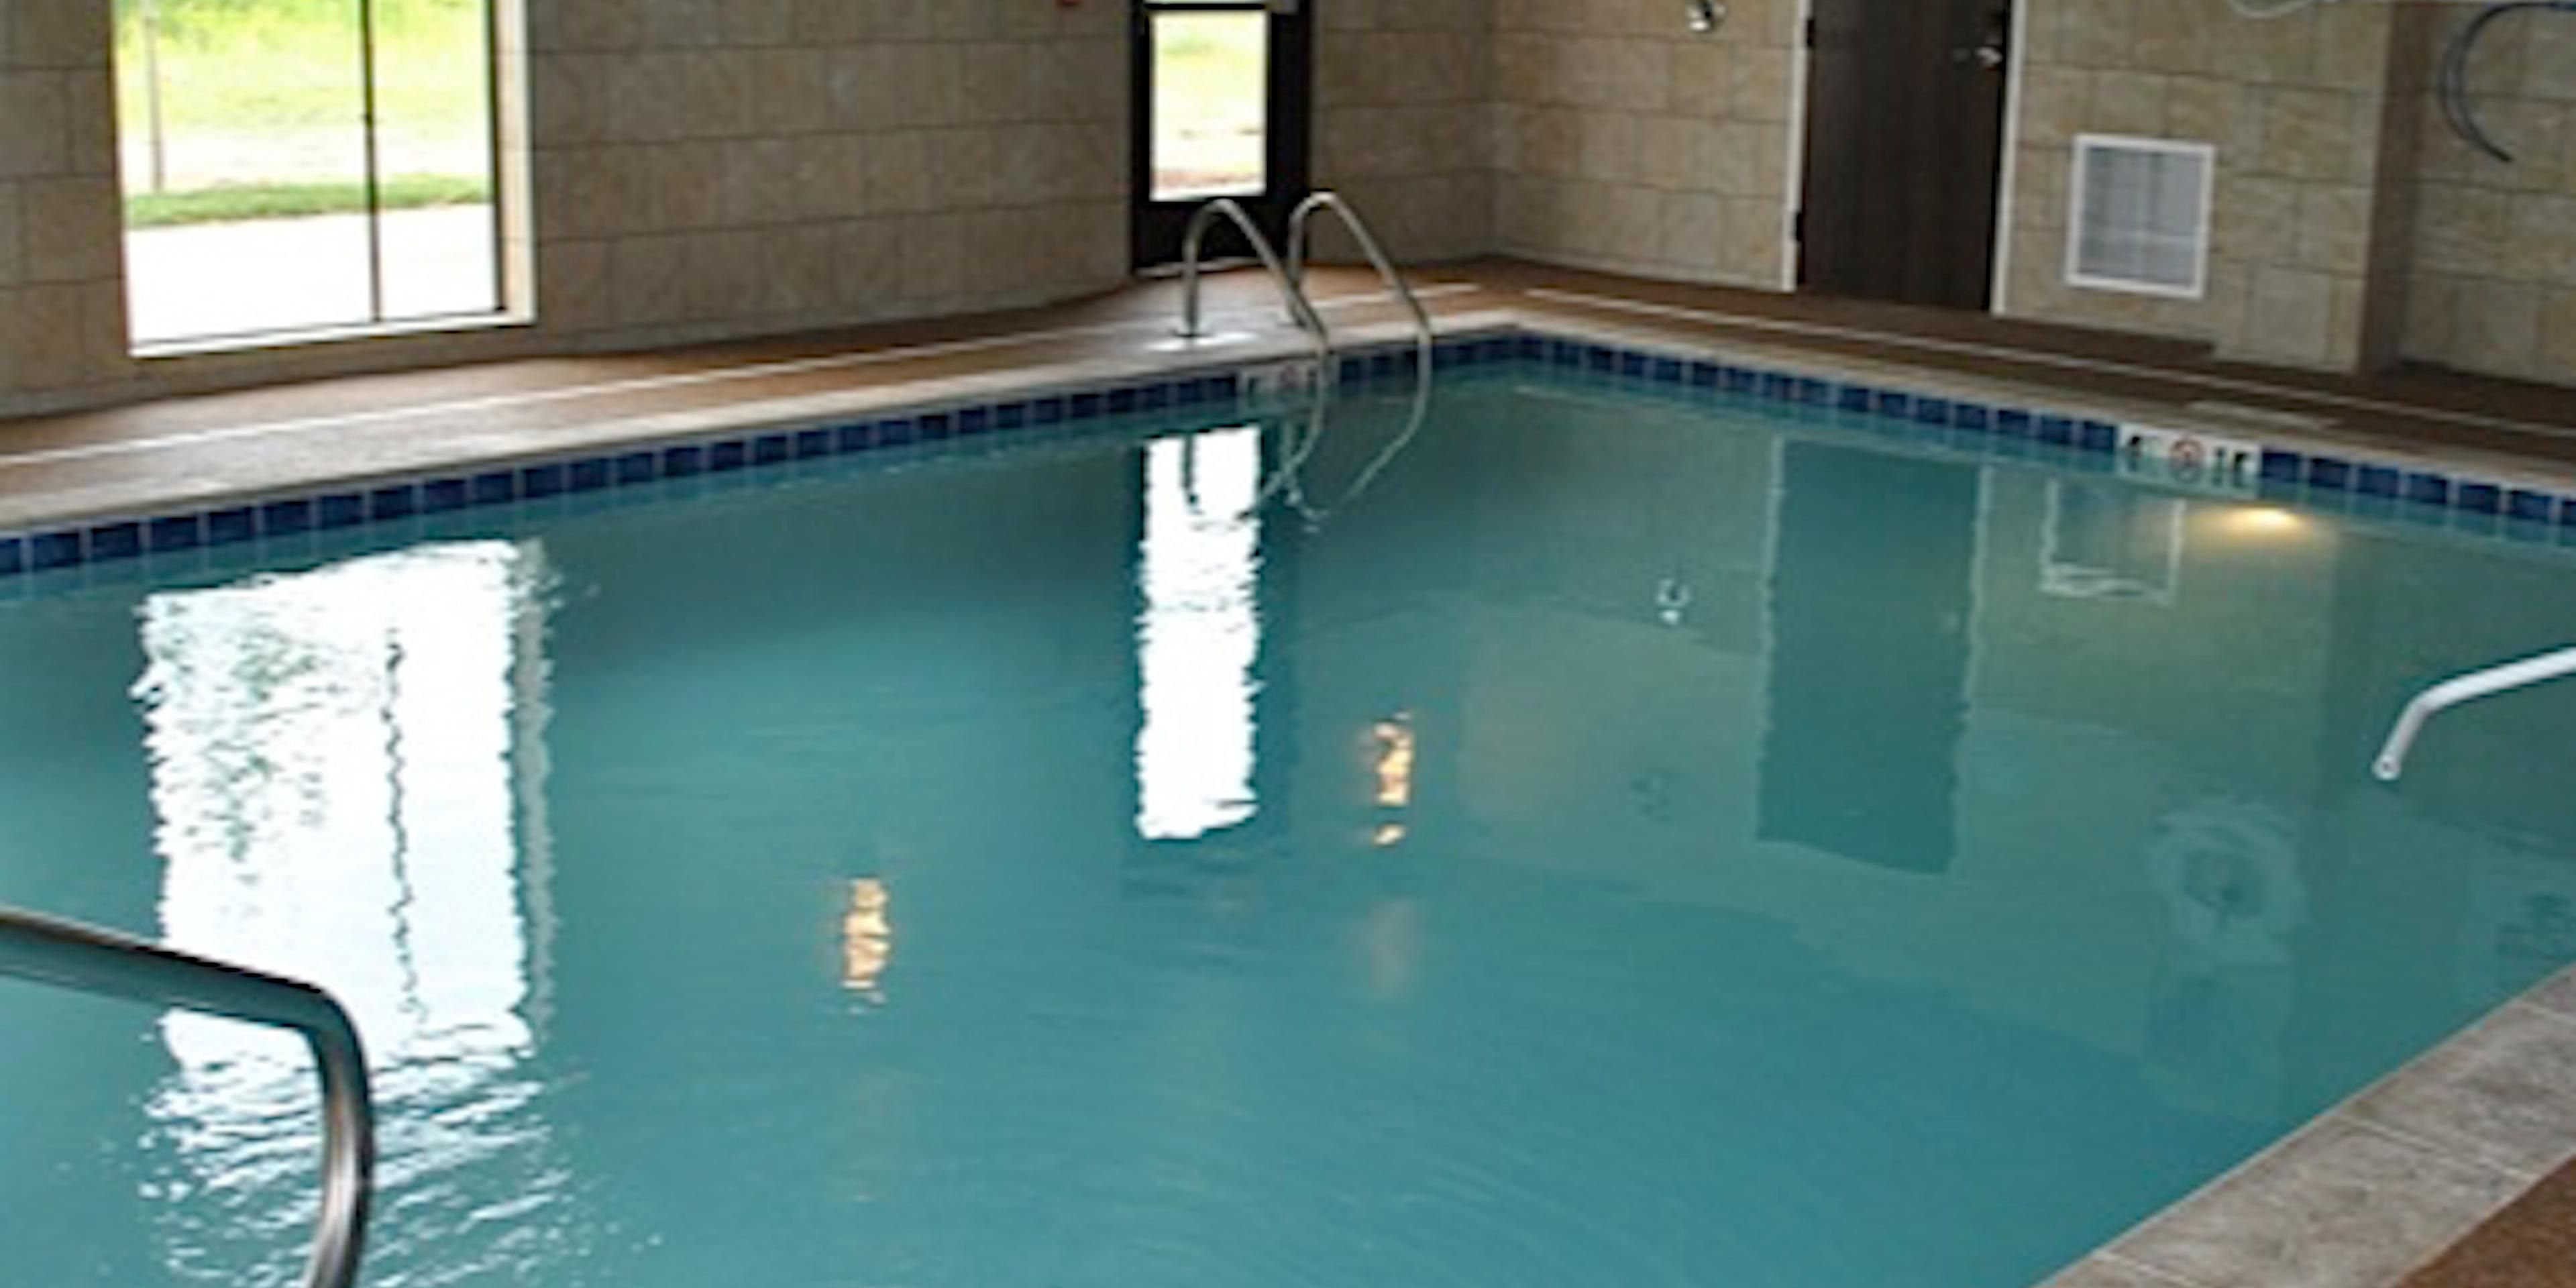 Enjoy a refreshing dip in our indoor heated pool! Perfect for family time or relaxing after a long day. Towels are provided for your comfort and convenience.